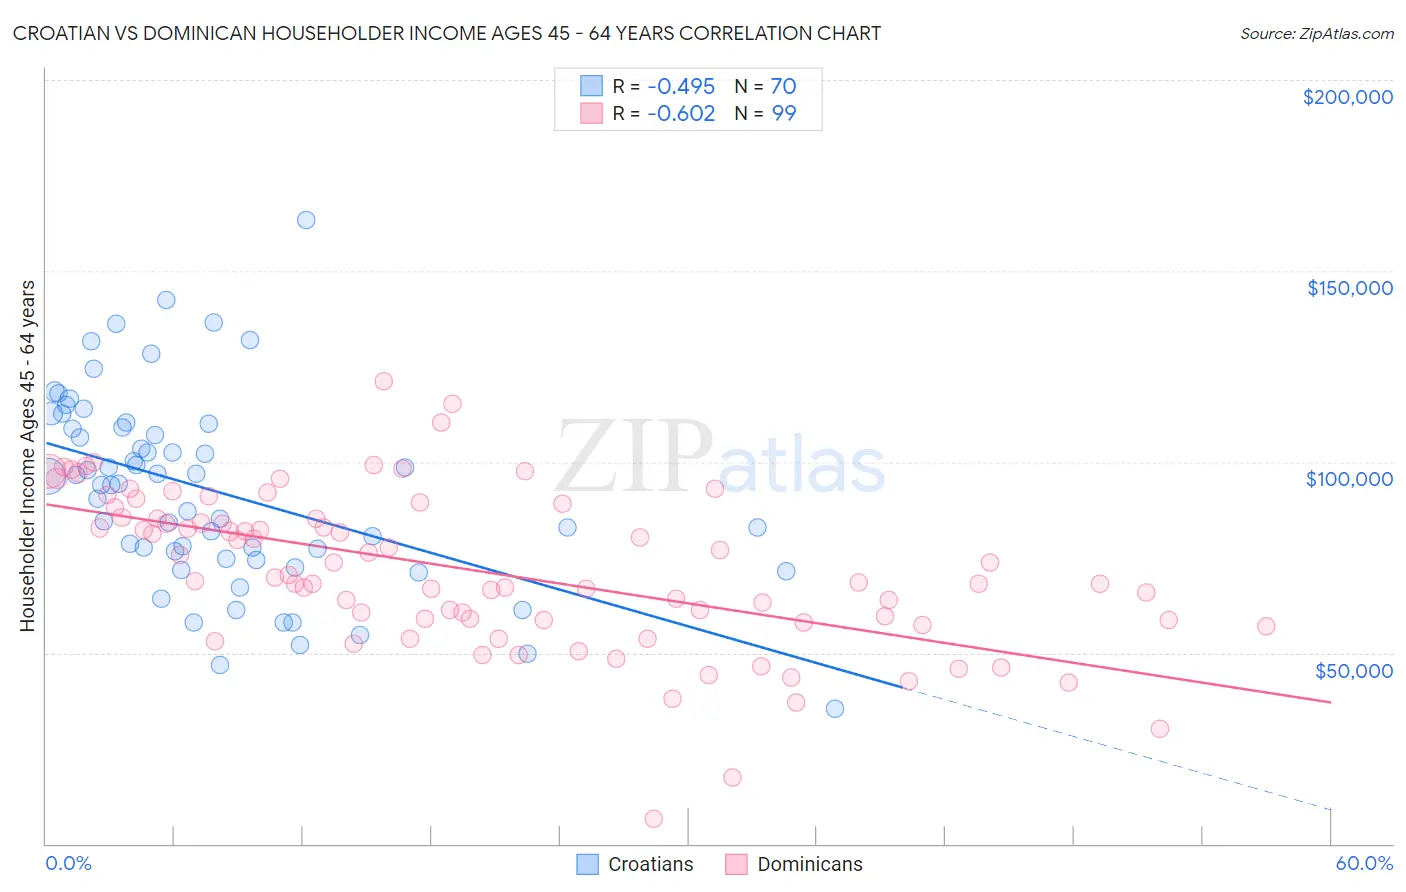 Croatian vs Dominican Householder Income Ages 45 - 64 years